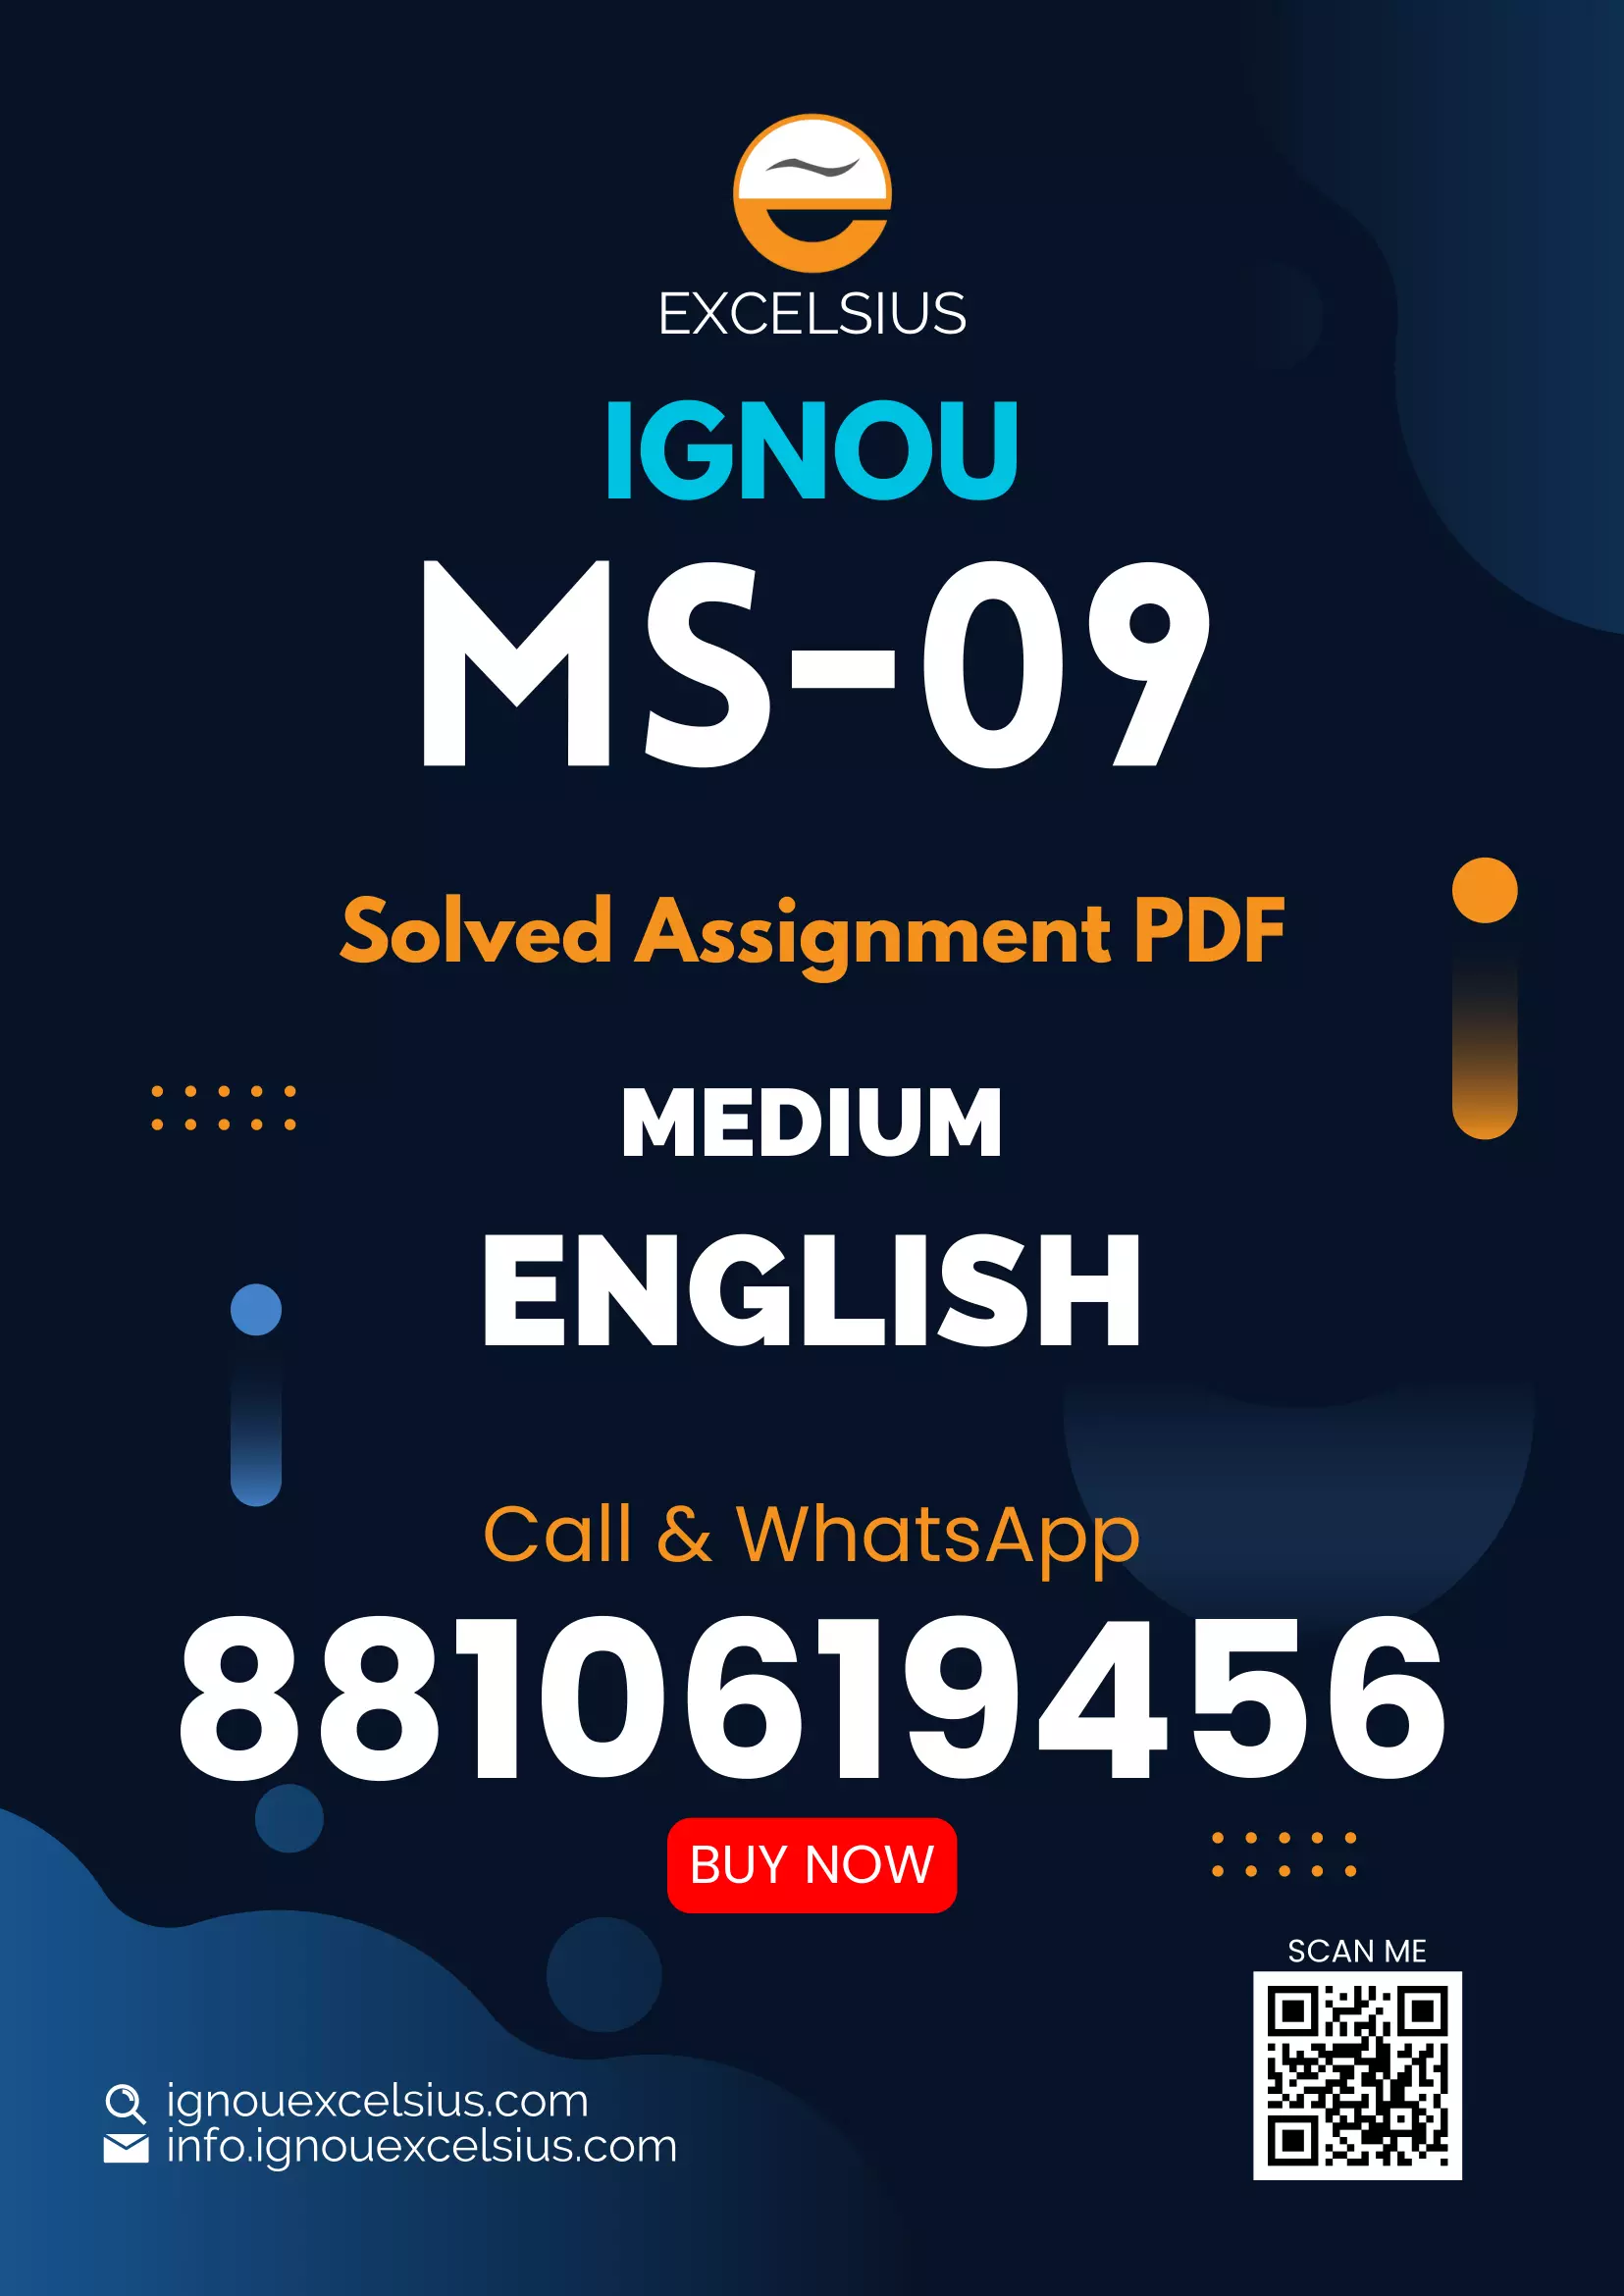 IGNOU MS-09 - Managerial Economics (MS) Latest Solved Assignment-January 2023 - July 2023